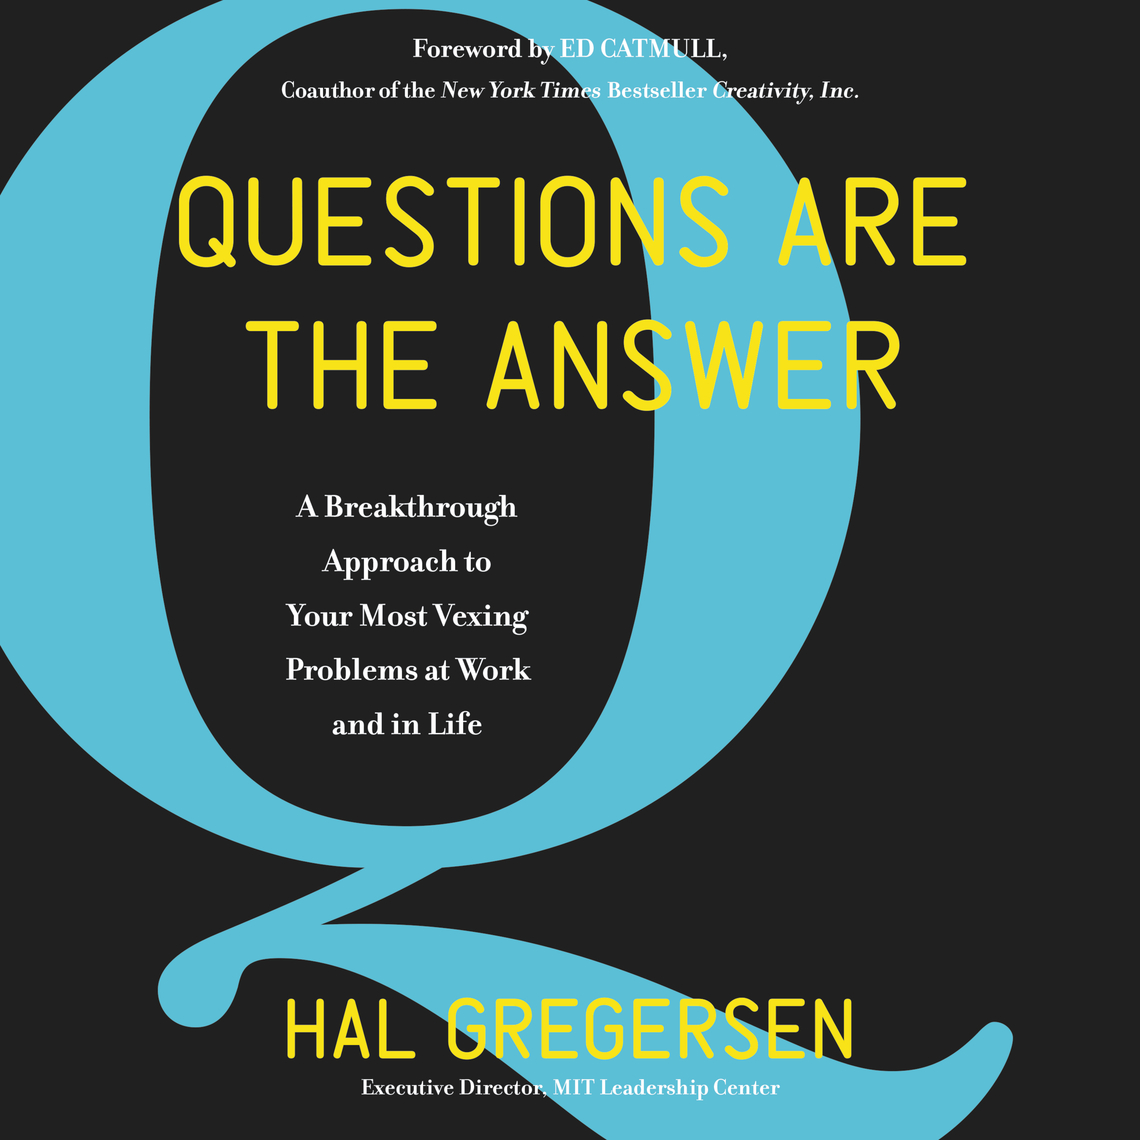 Are　Questions　Hal　Audiobook　Gregersen　the　by　Answer　Scribd